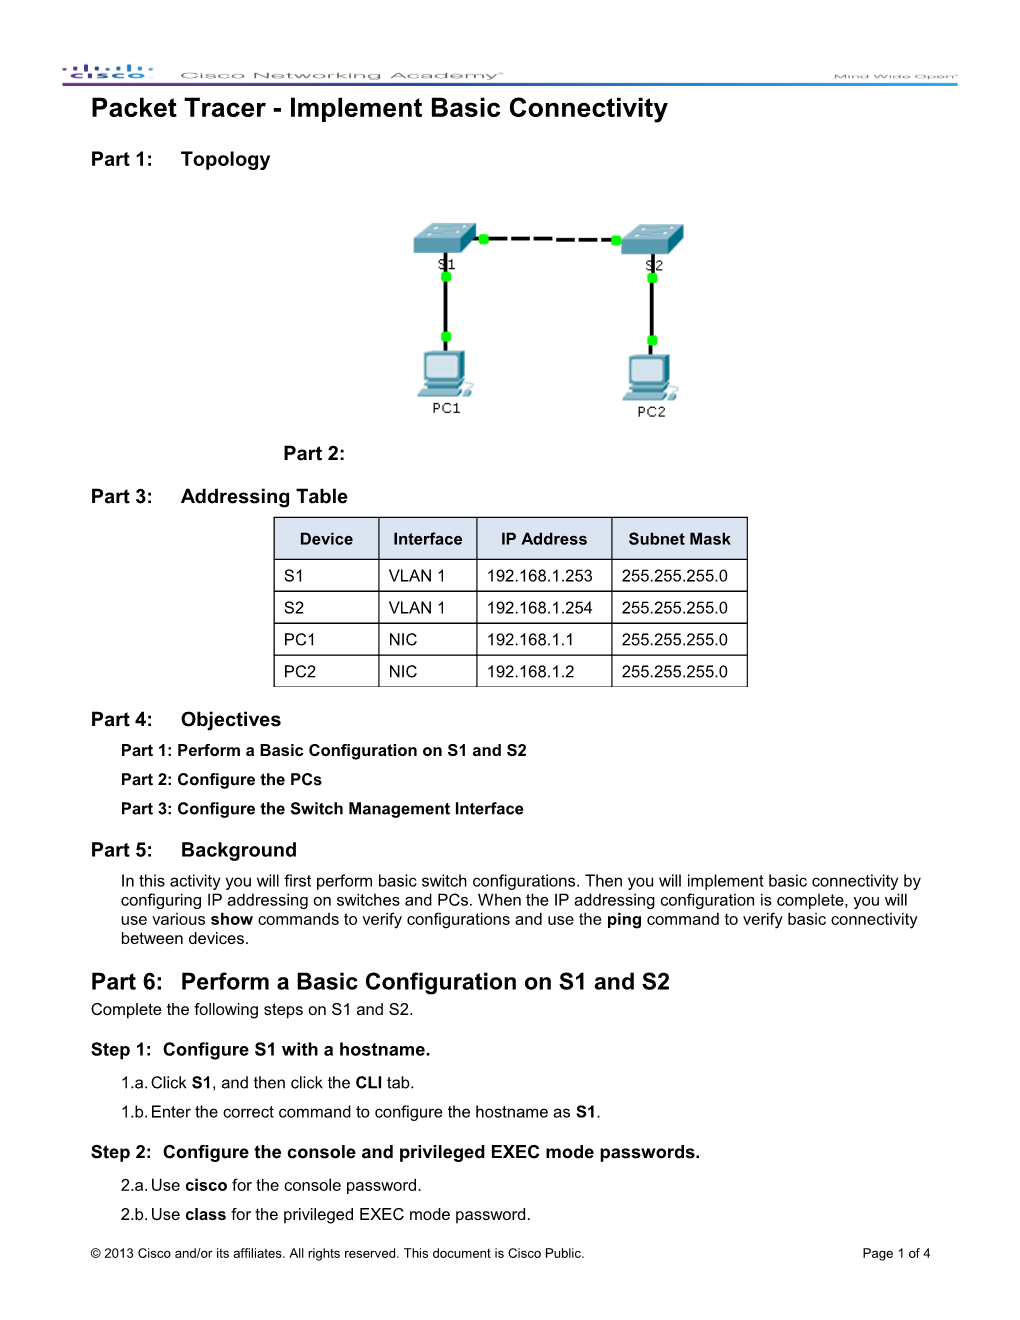 Packet Tracer - Implement Basic Connectivity